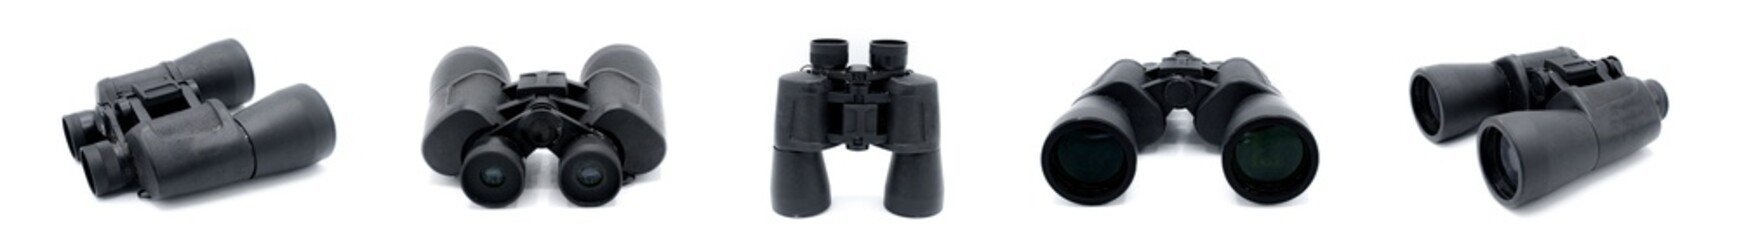 A pair of black rubber grip metal binoculars isolated on white background.  Well worn, used, dirty full of sand from being out in the field viewing wildlife.  Five views